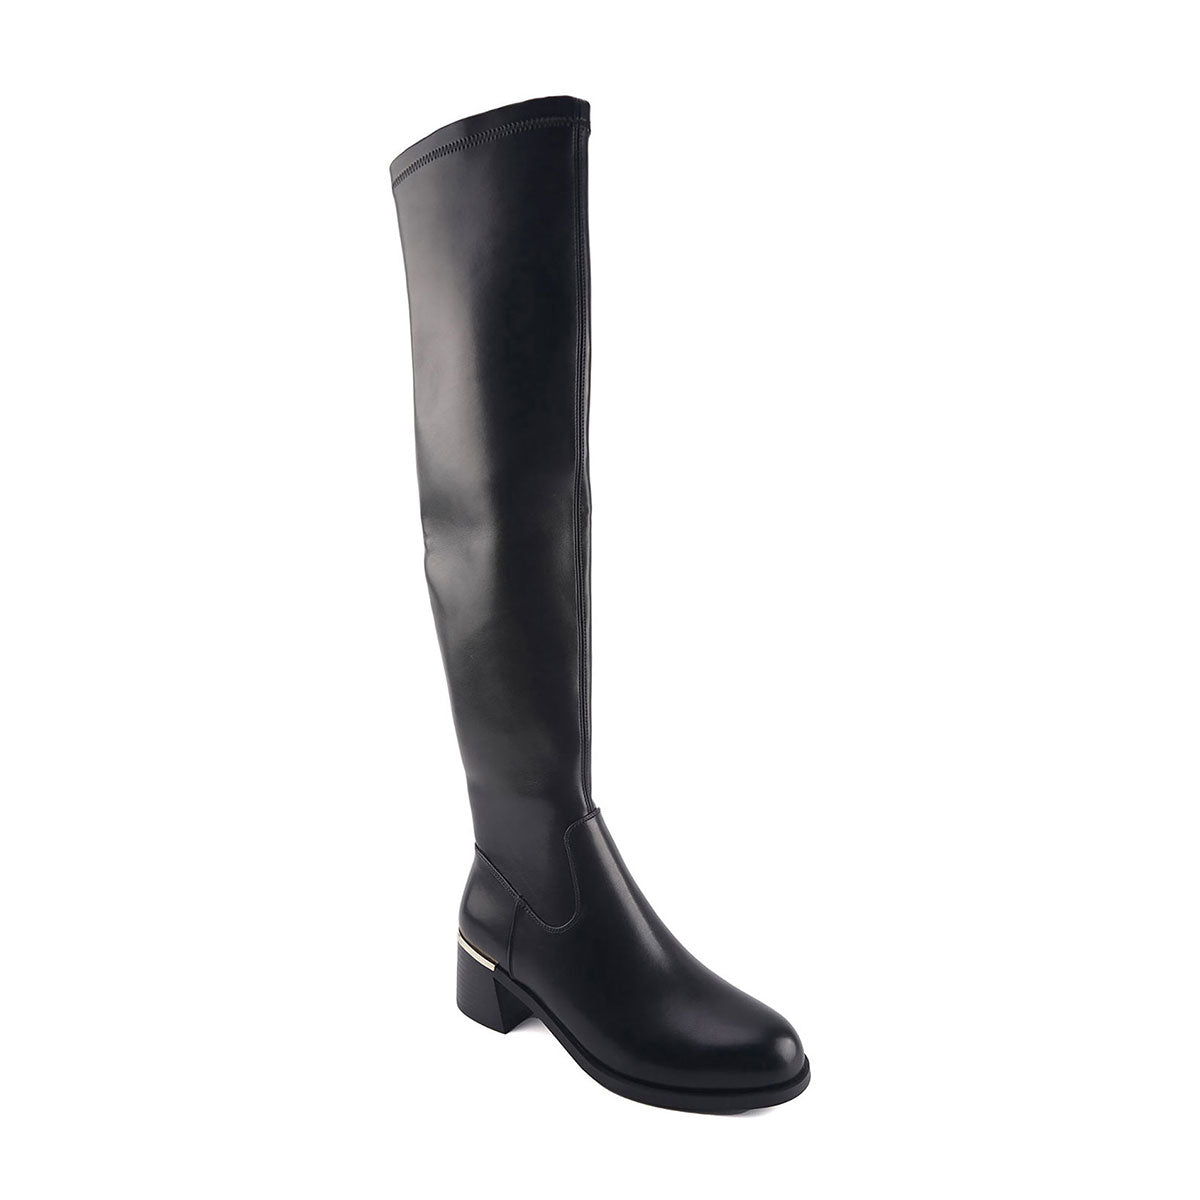 Orlow High Knee Boots - Black